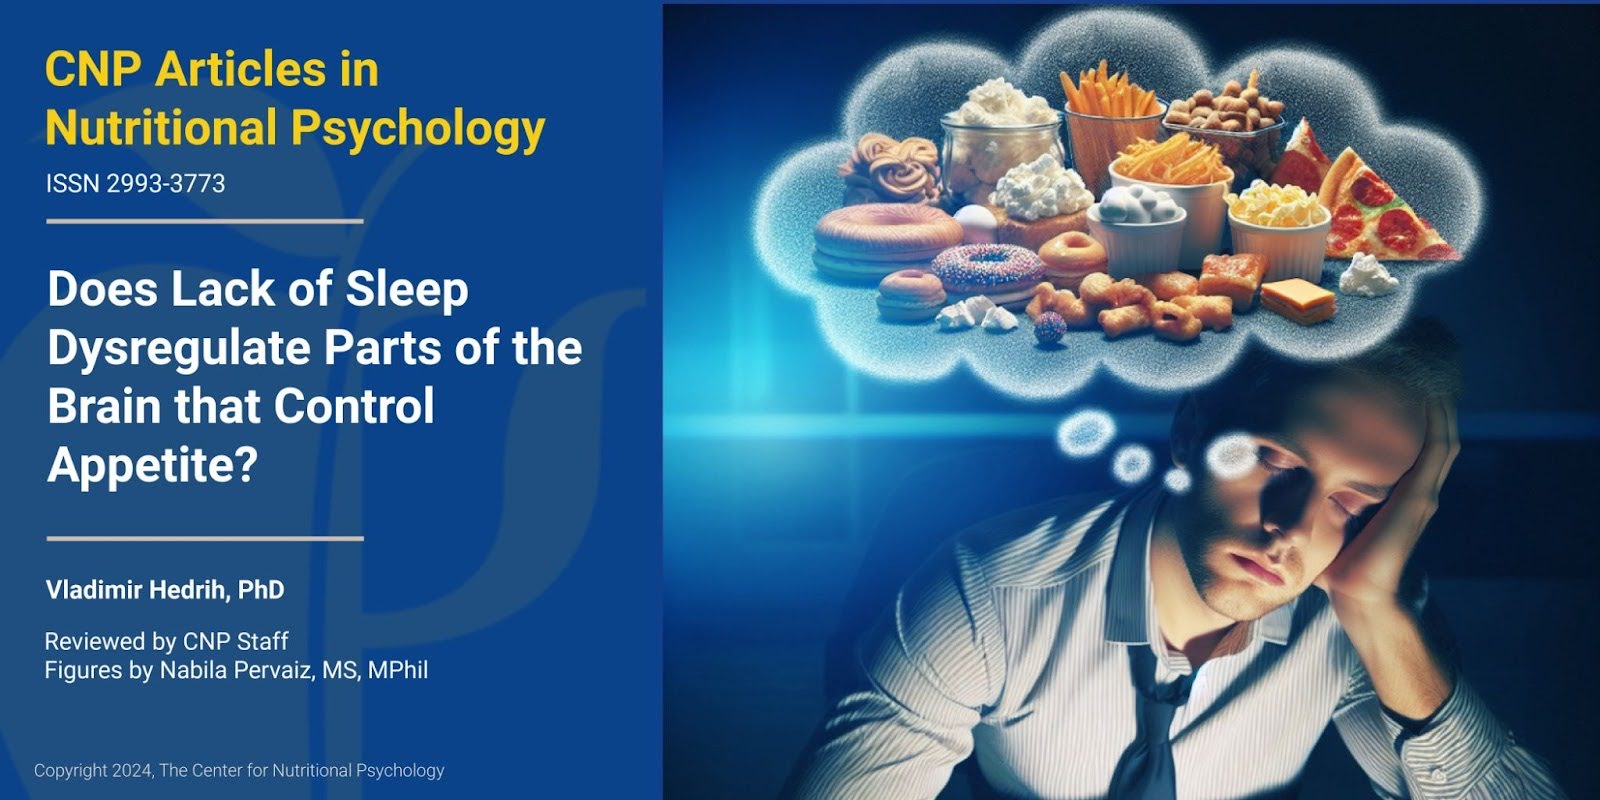 Does Lack of Sleep Dysregulate Parts of the Brain that Control Appetite